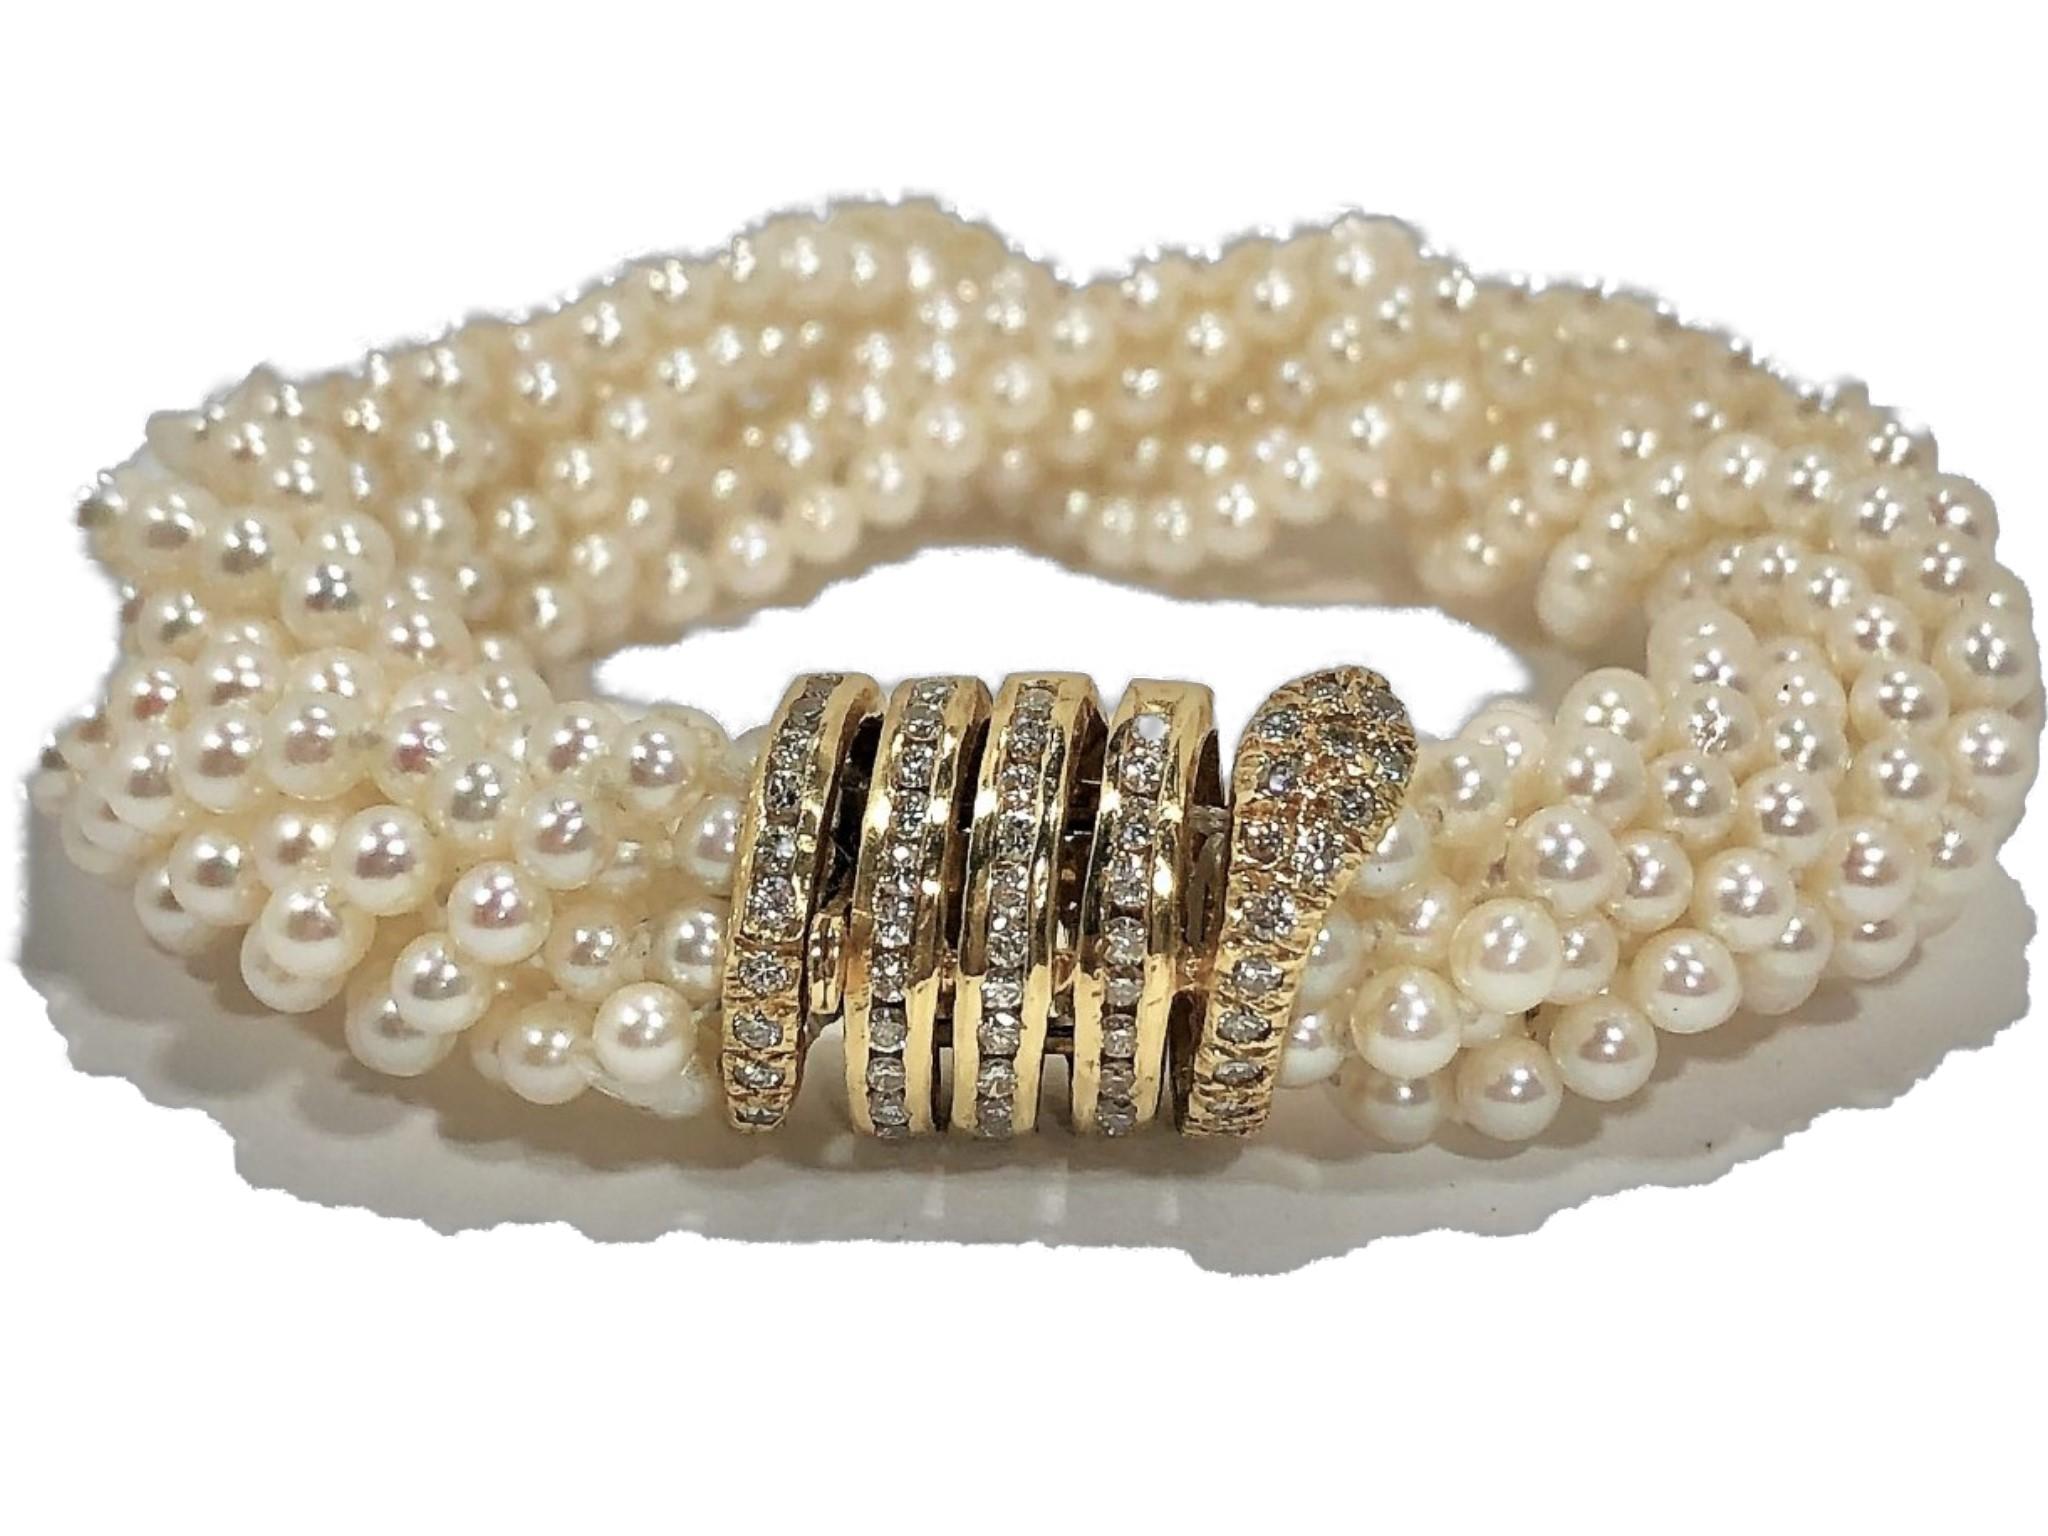 Fashioned in Italy, this 10 strand cultured pearl bracelet comes
with a delicate, beautifully crafted 18K Yellow Gold coiled snake 
clasp, set with 61 round brilliant cut diamonds weighing an
approximate total of 1.0CT of overall F/G Color and VS1